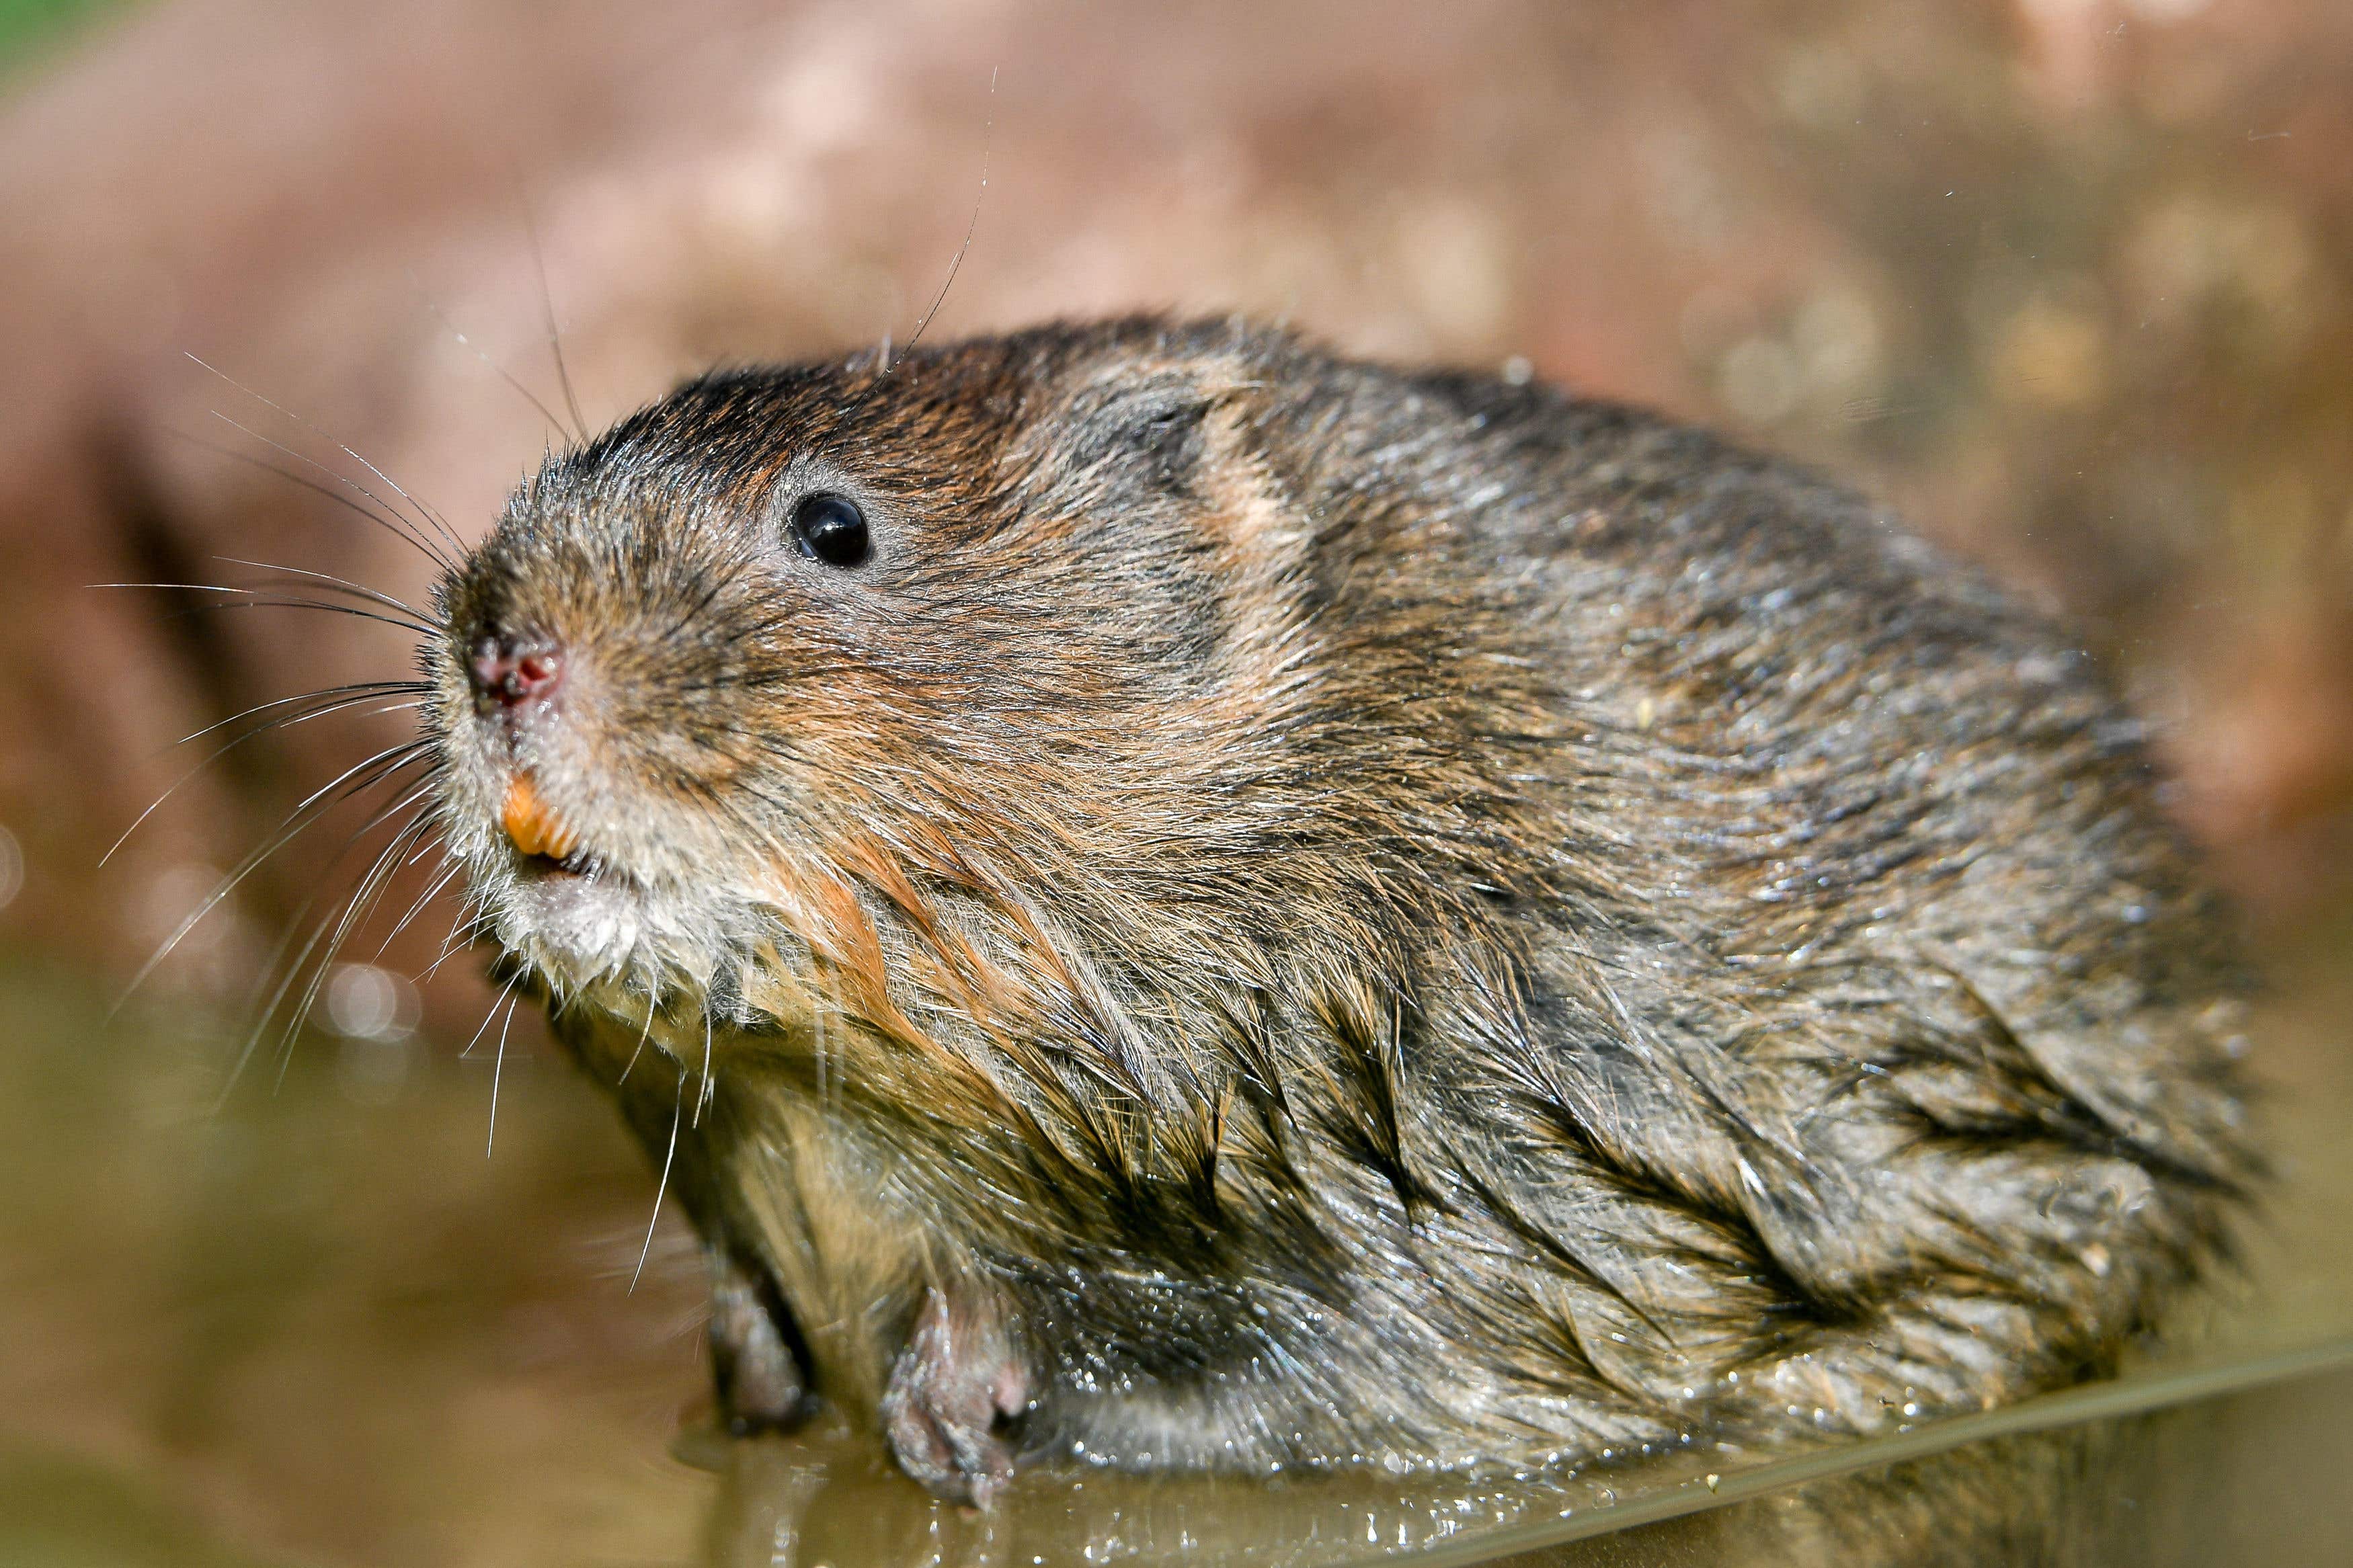 Endangered water voles could thrive in new habitats that beavers have created in Knapdale, conservationists say (Ben Birchall/PA)